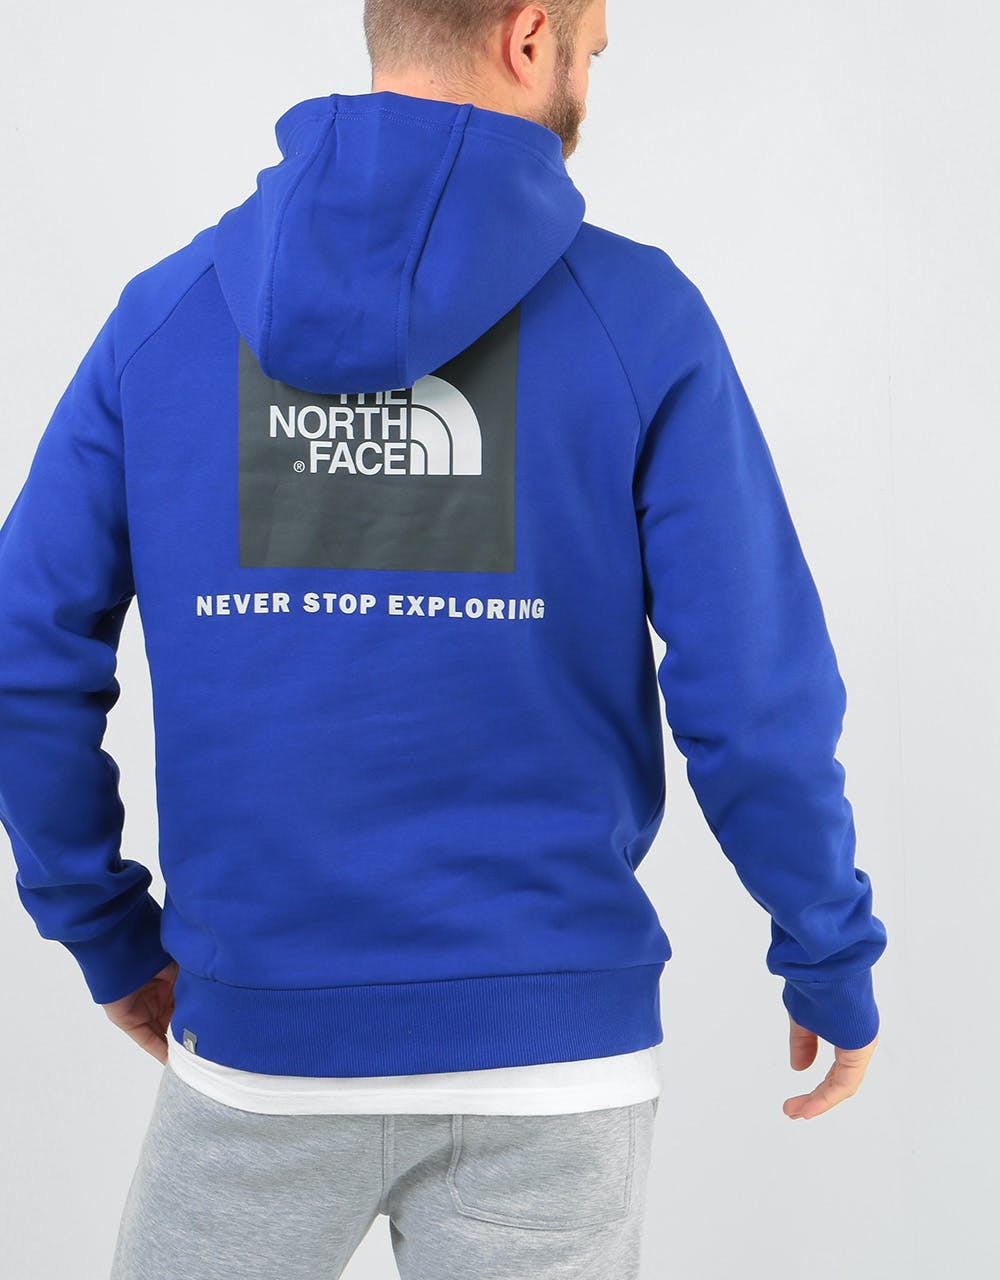 The North Face Raglan Red Box Pullover Hoodie - Lapis Blue